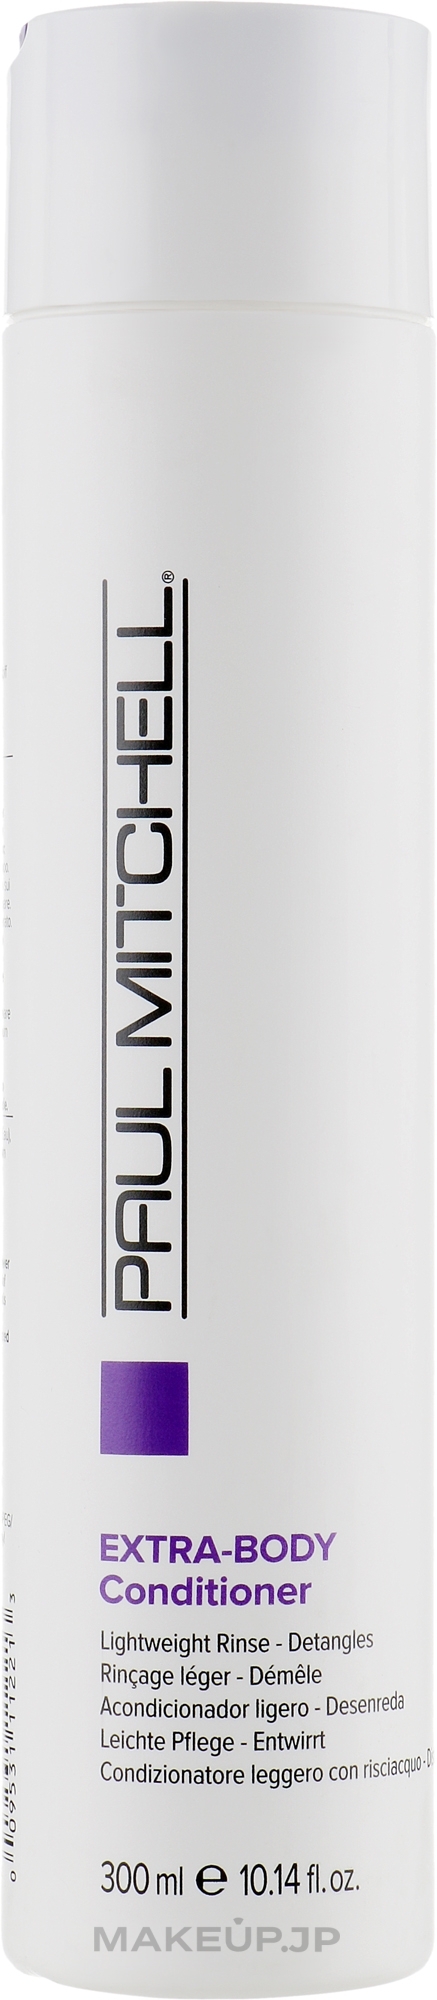 Extra Volume Conditioner - Paul Mitchell Extra-Body Daily Rinse  — photo 300 ml